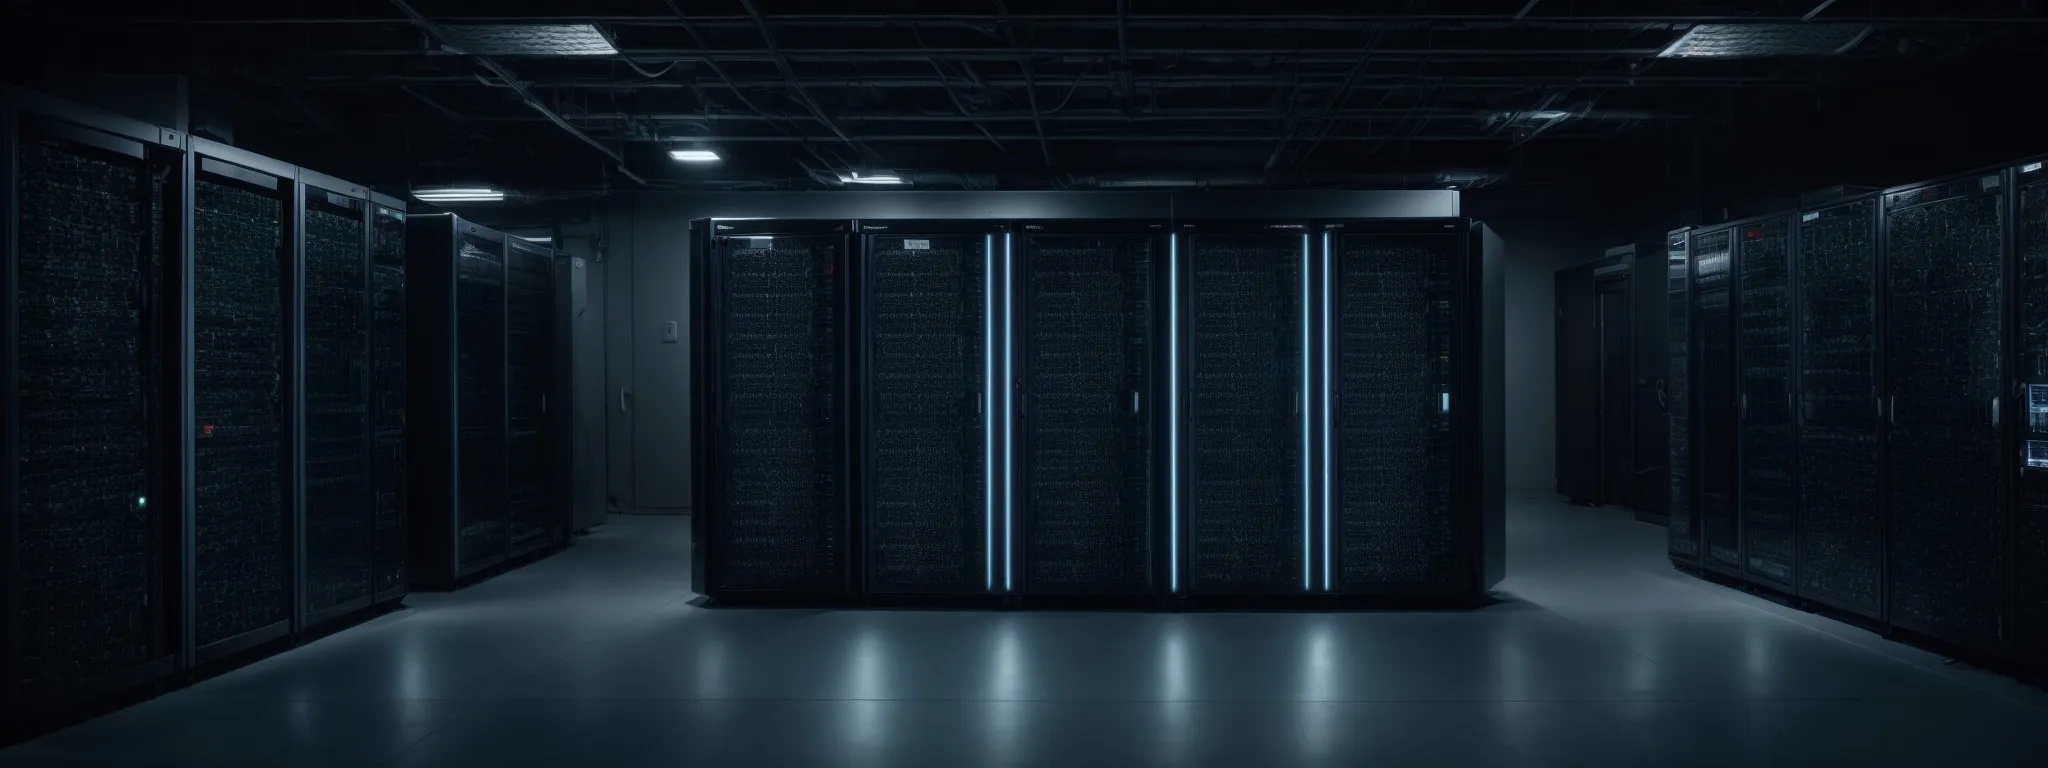 a secure server room with racks of encrypted data storage systems.